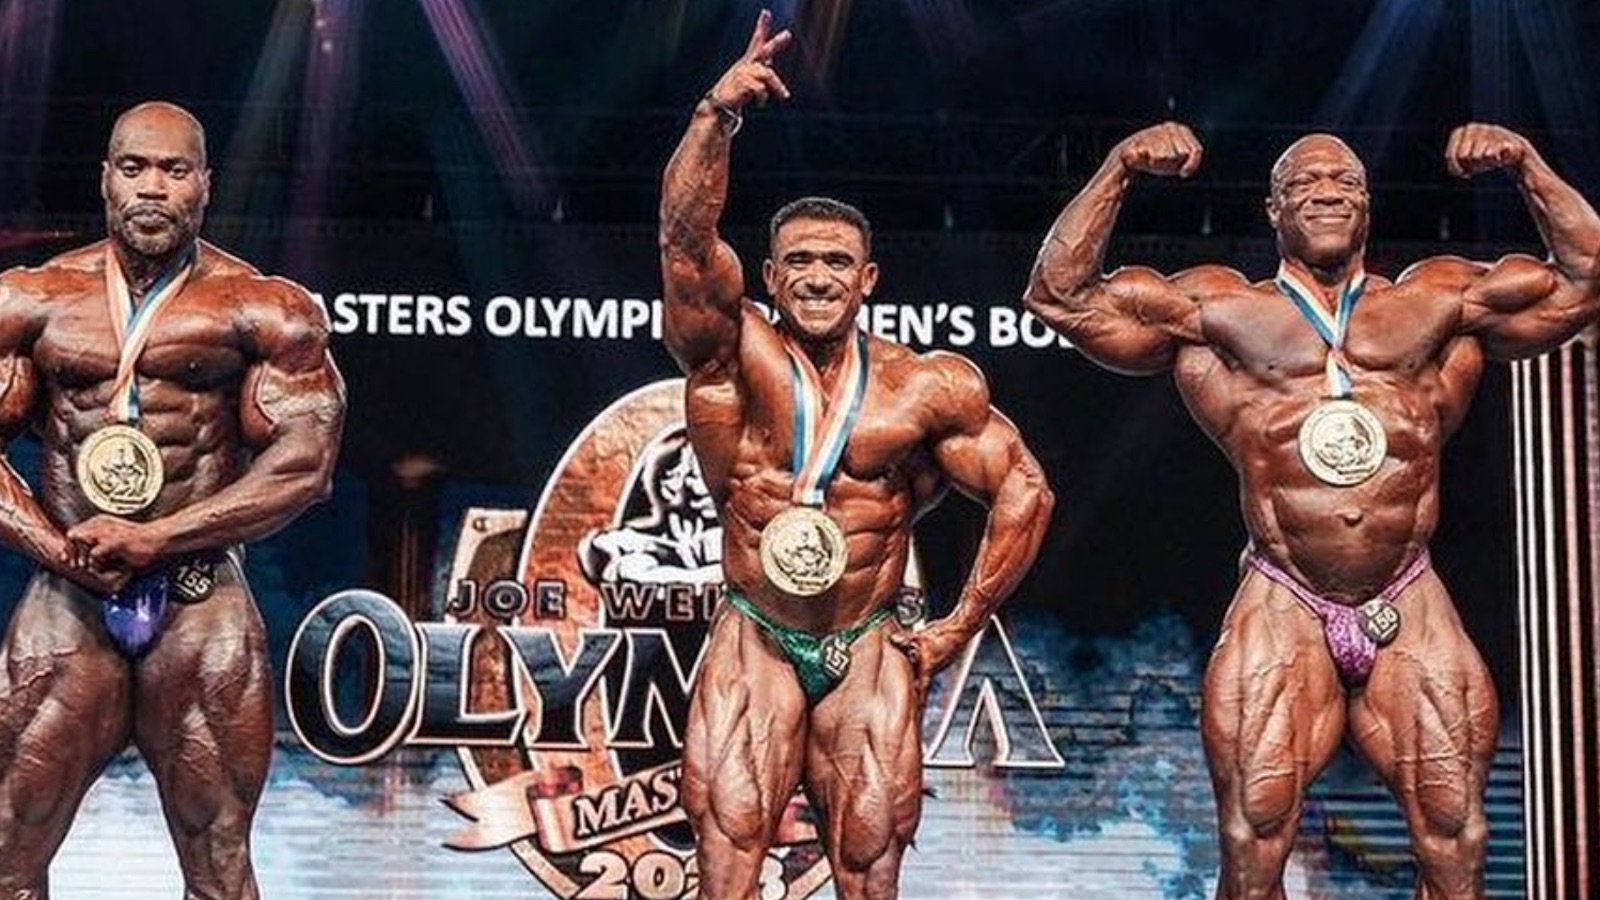 2023 Masters Olympia - Wings of Strength